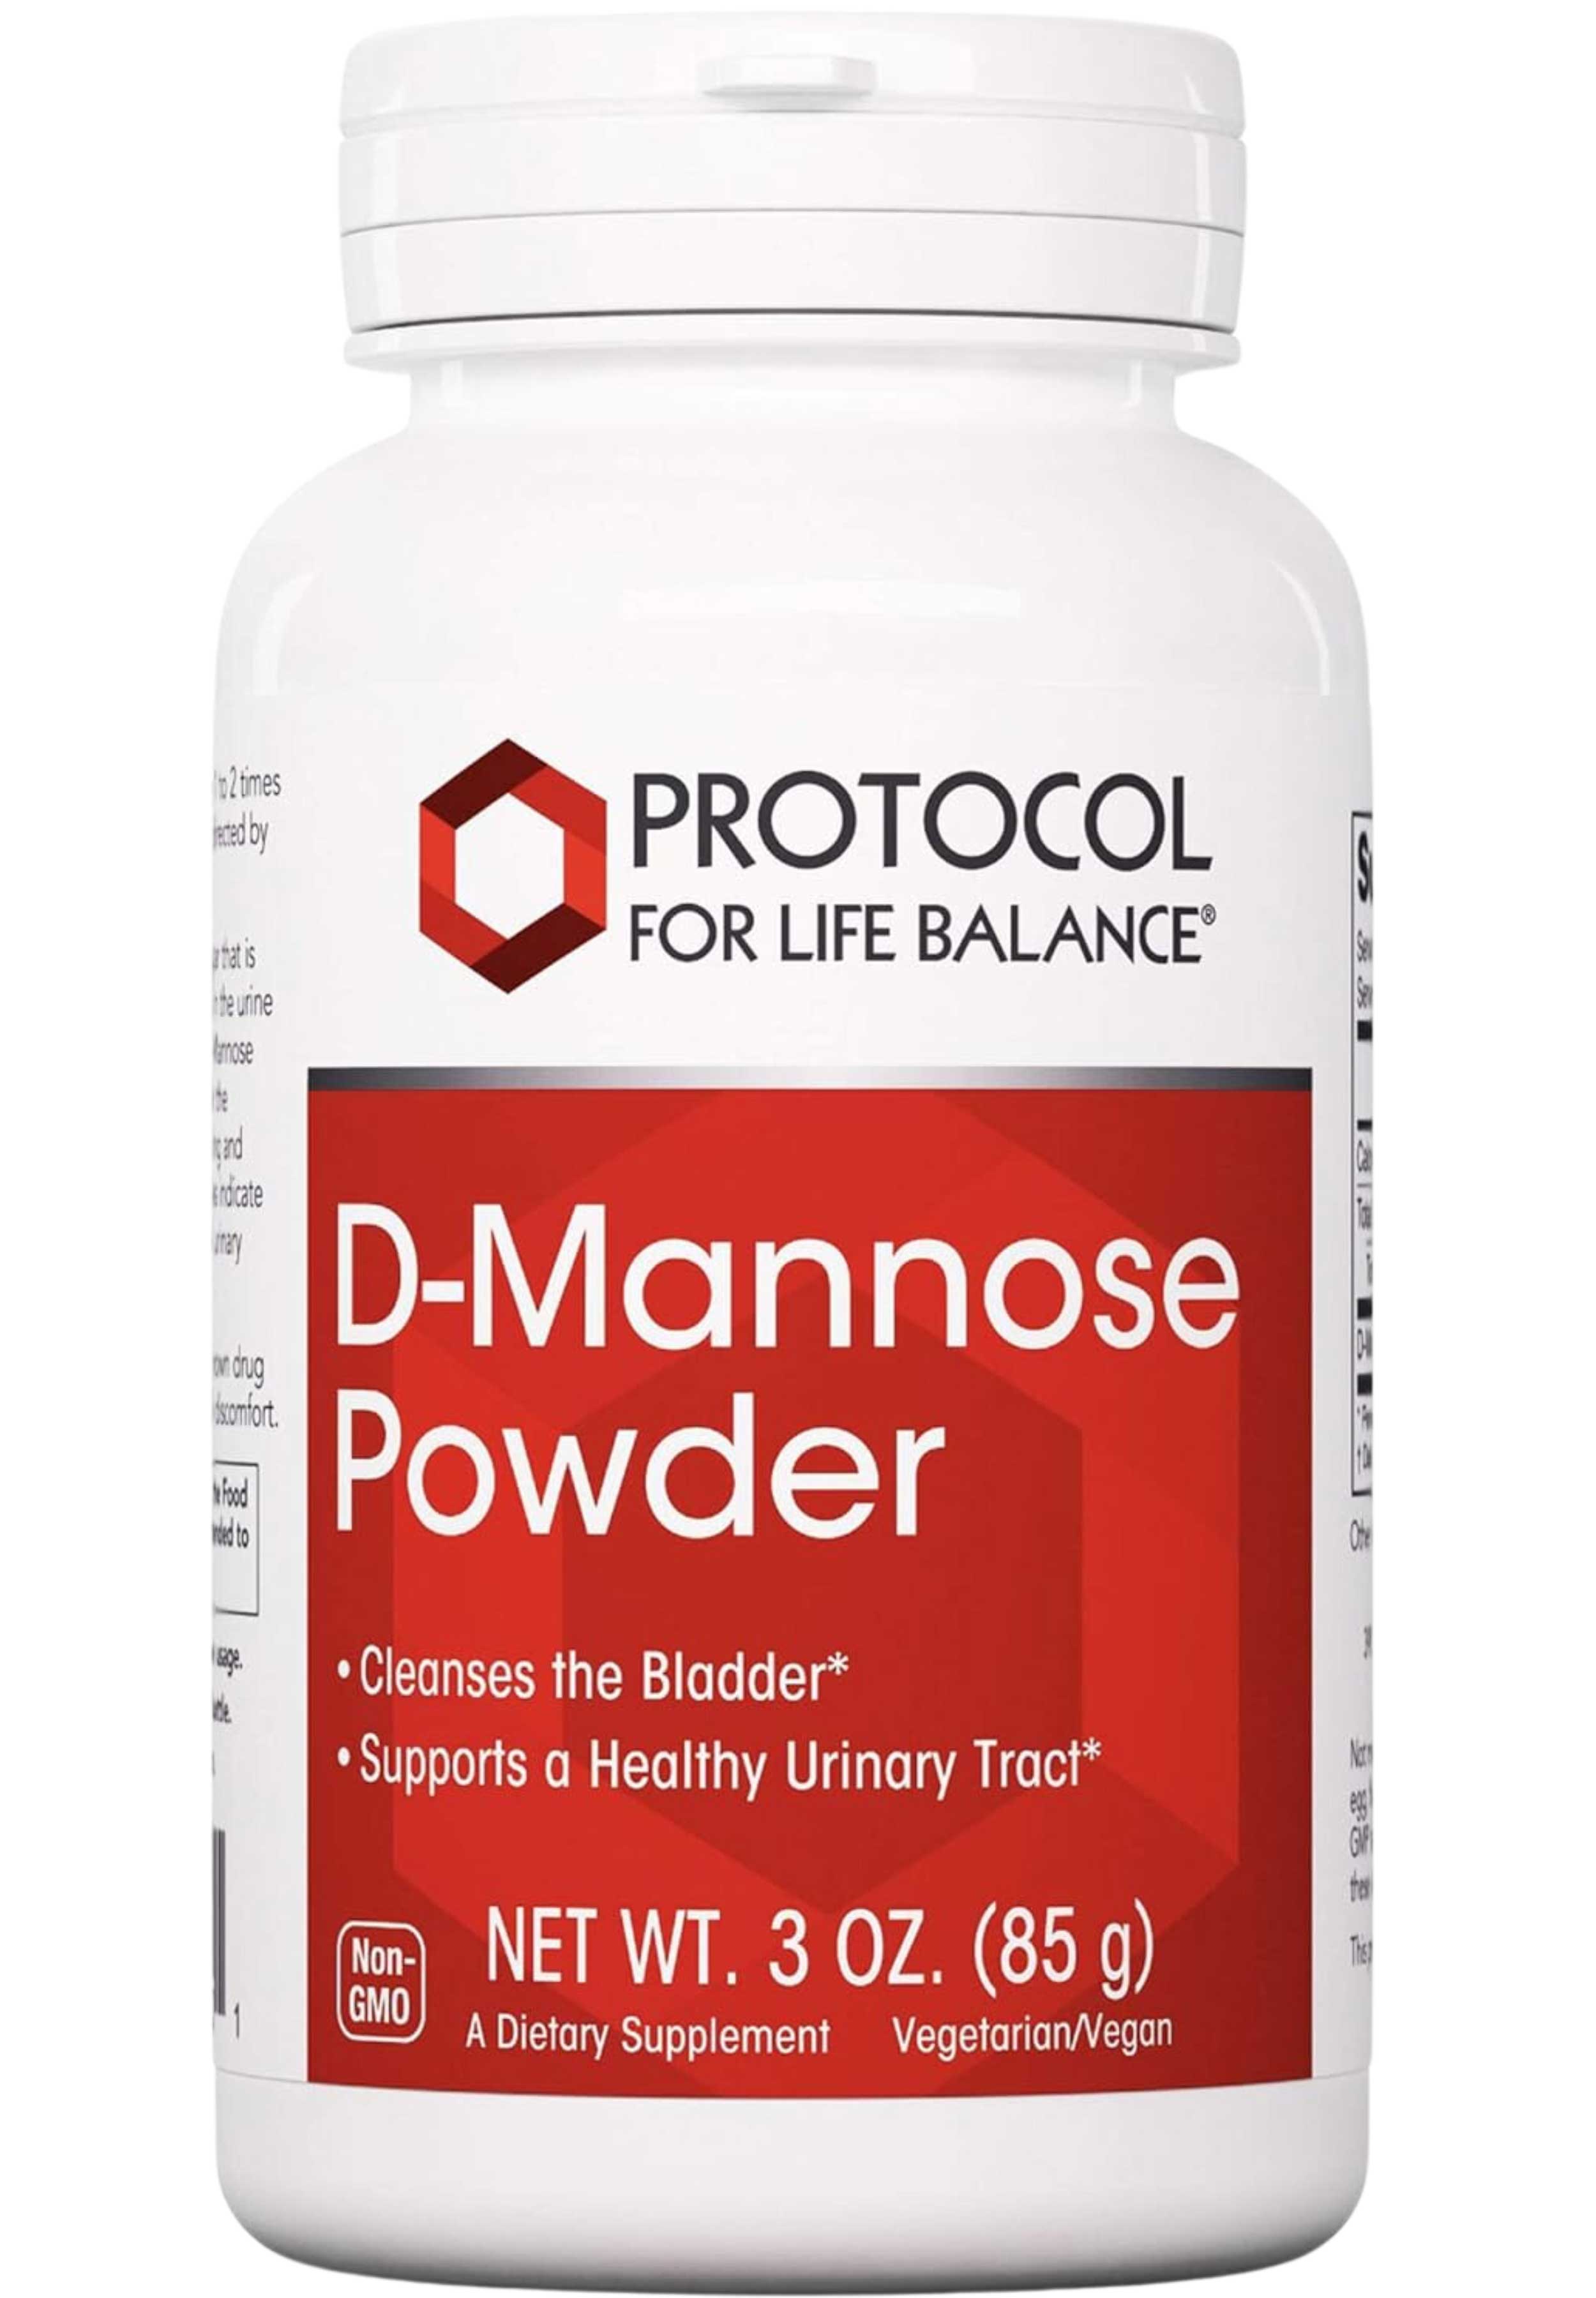 Protocol for Life Balance D-Mannose